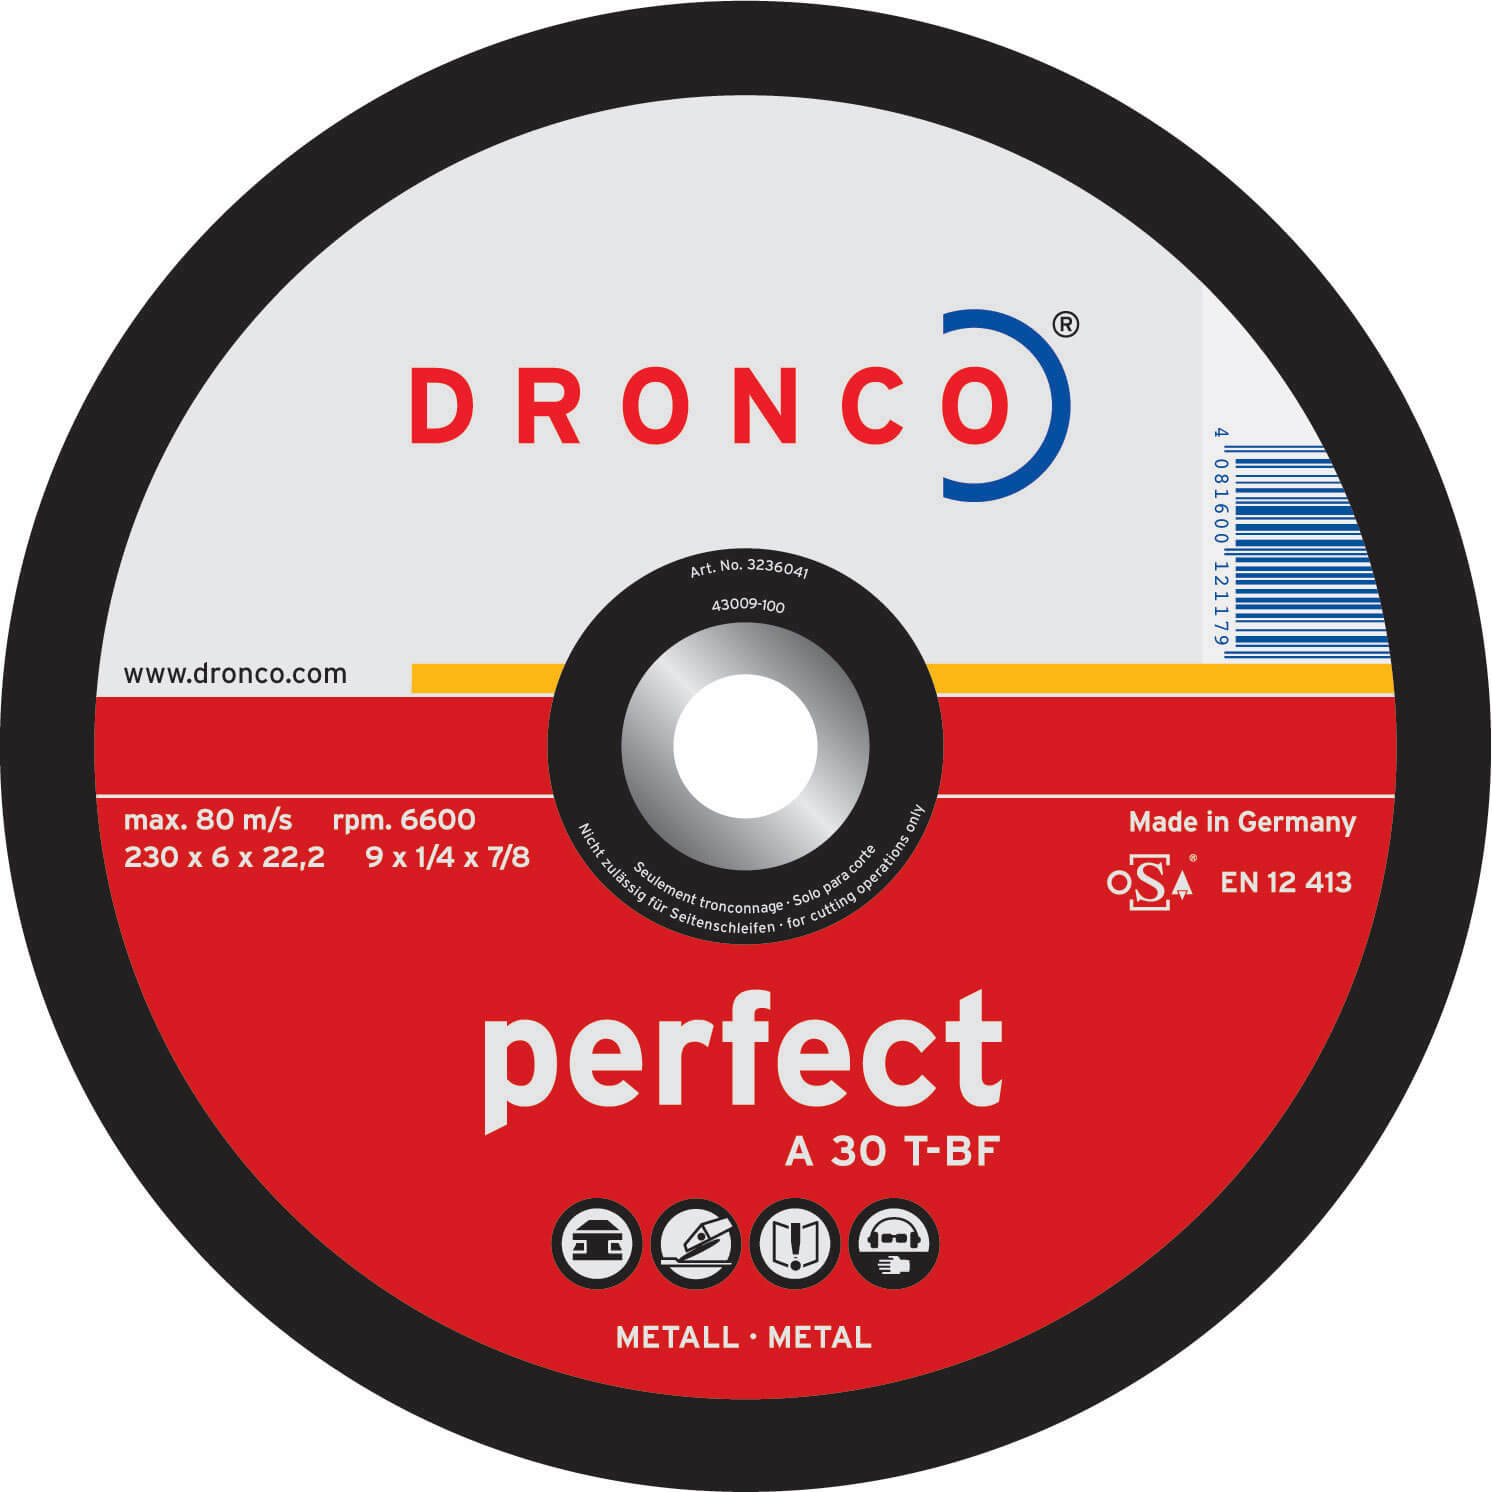 Image of Dronco A 30 T PERFECT Depressed Metal Grinding Disc 100mm Pack of 1